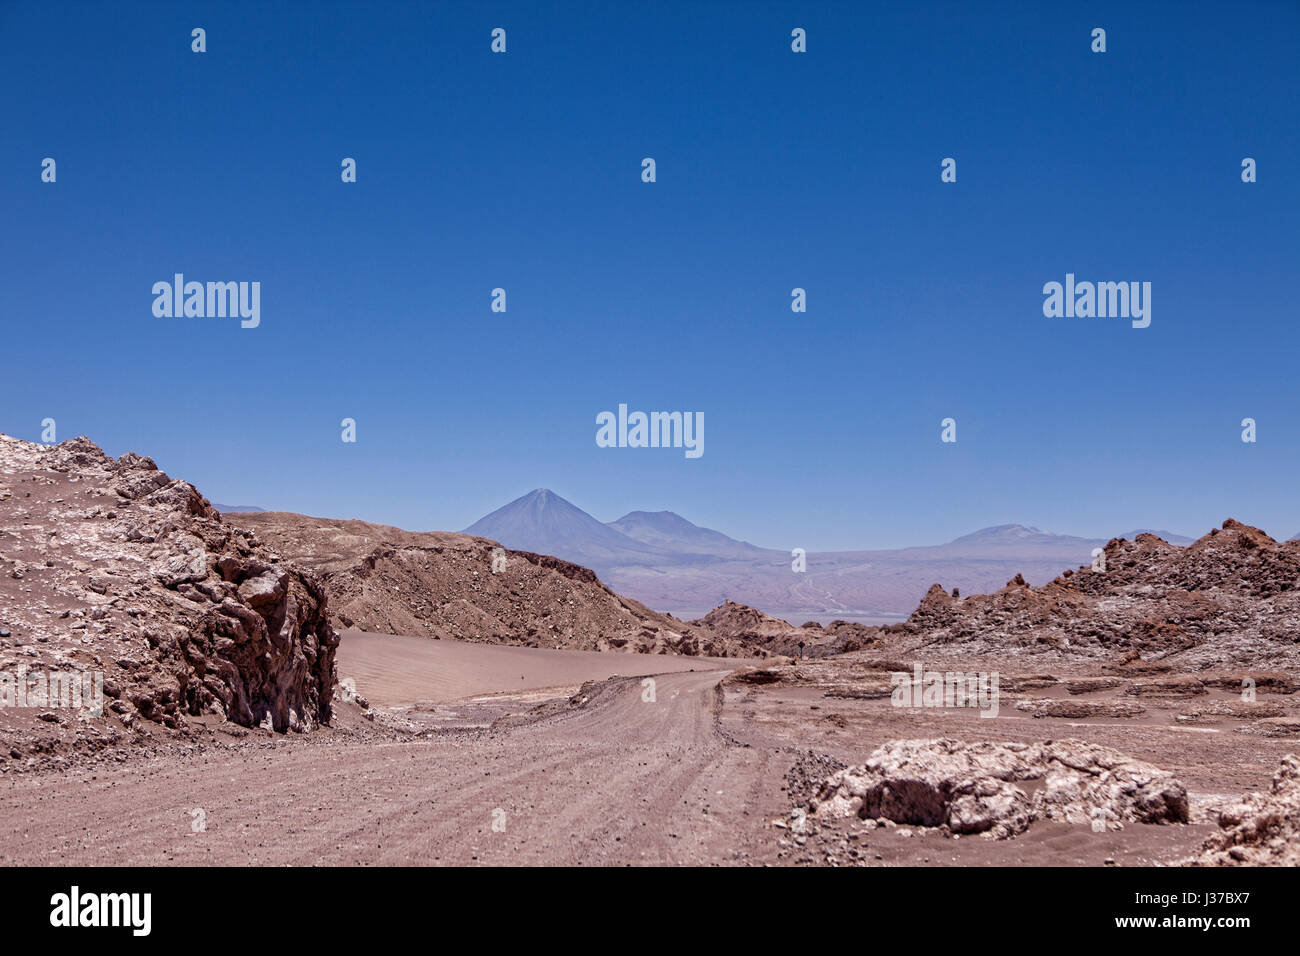 Looking down the road in the Valley of the Moons, Atacama Desert, Chile. Stock Photo